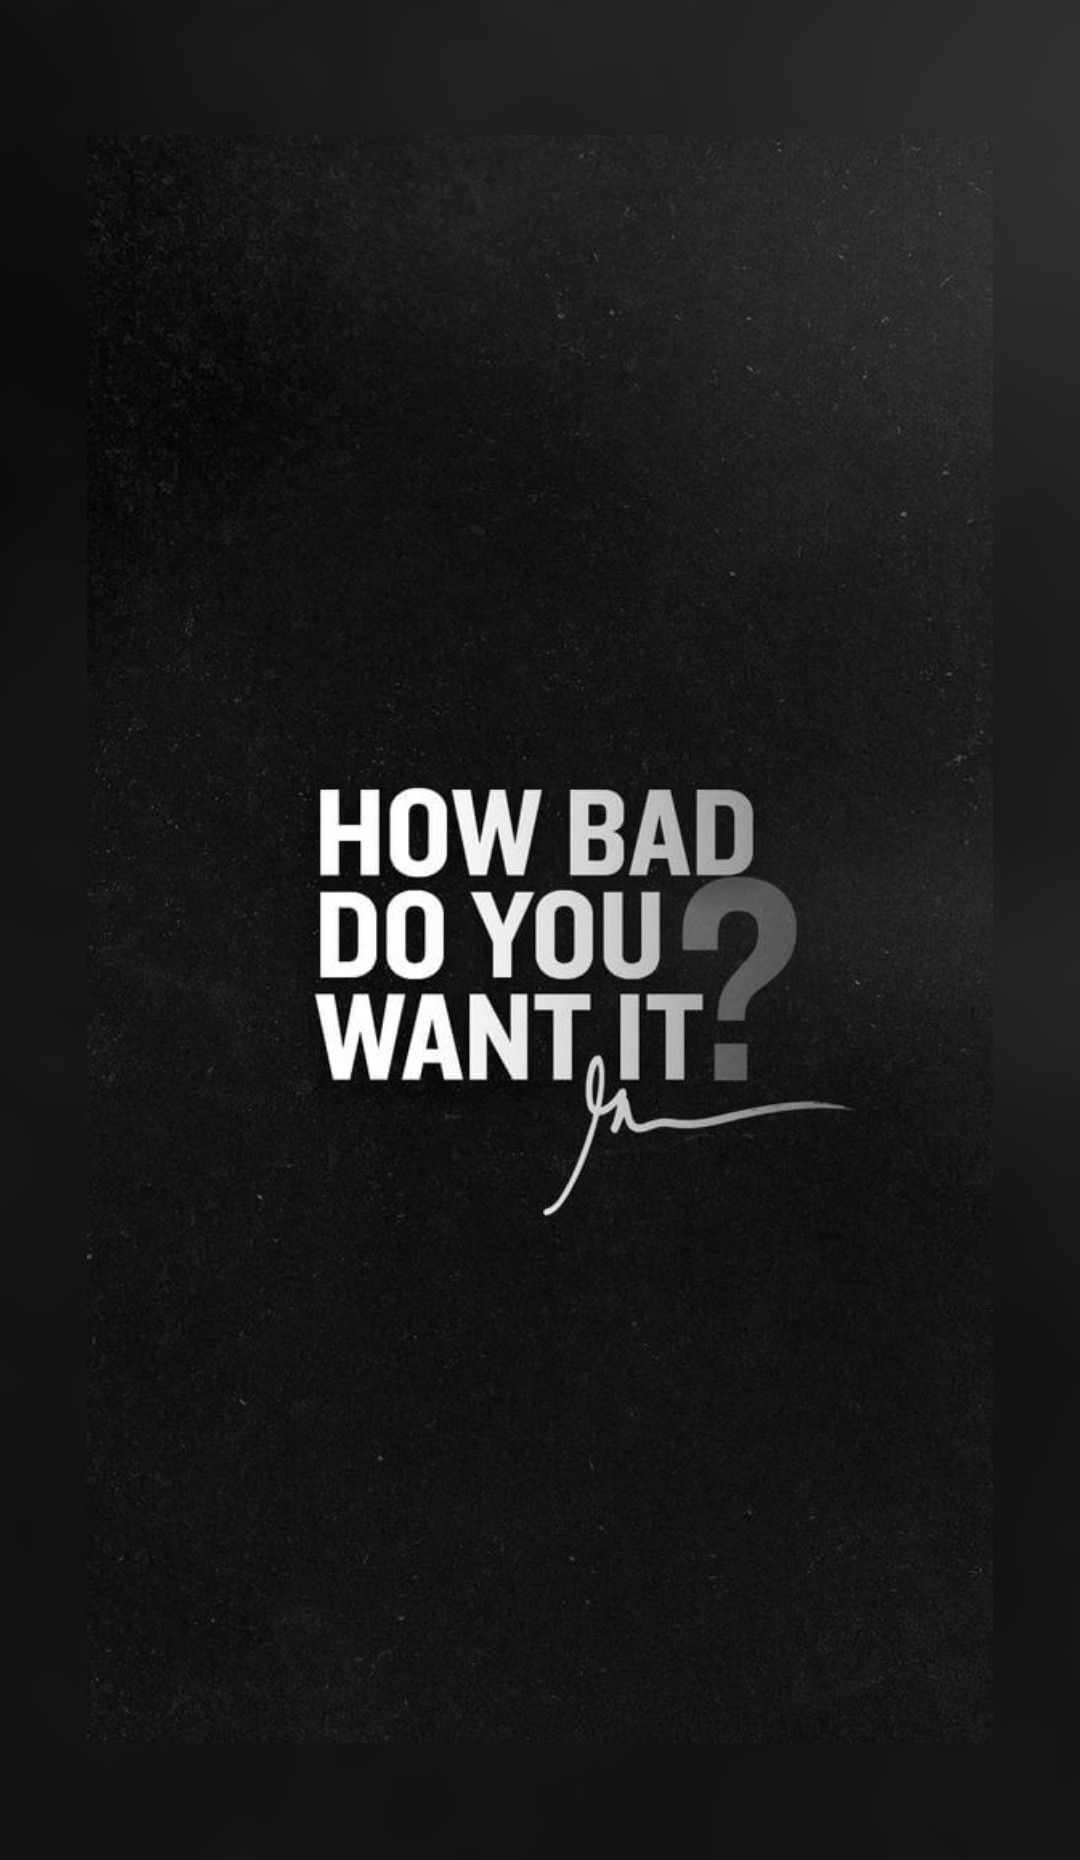 How Bad Do You Want It?. Motivational quotes wallpaper